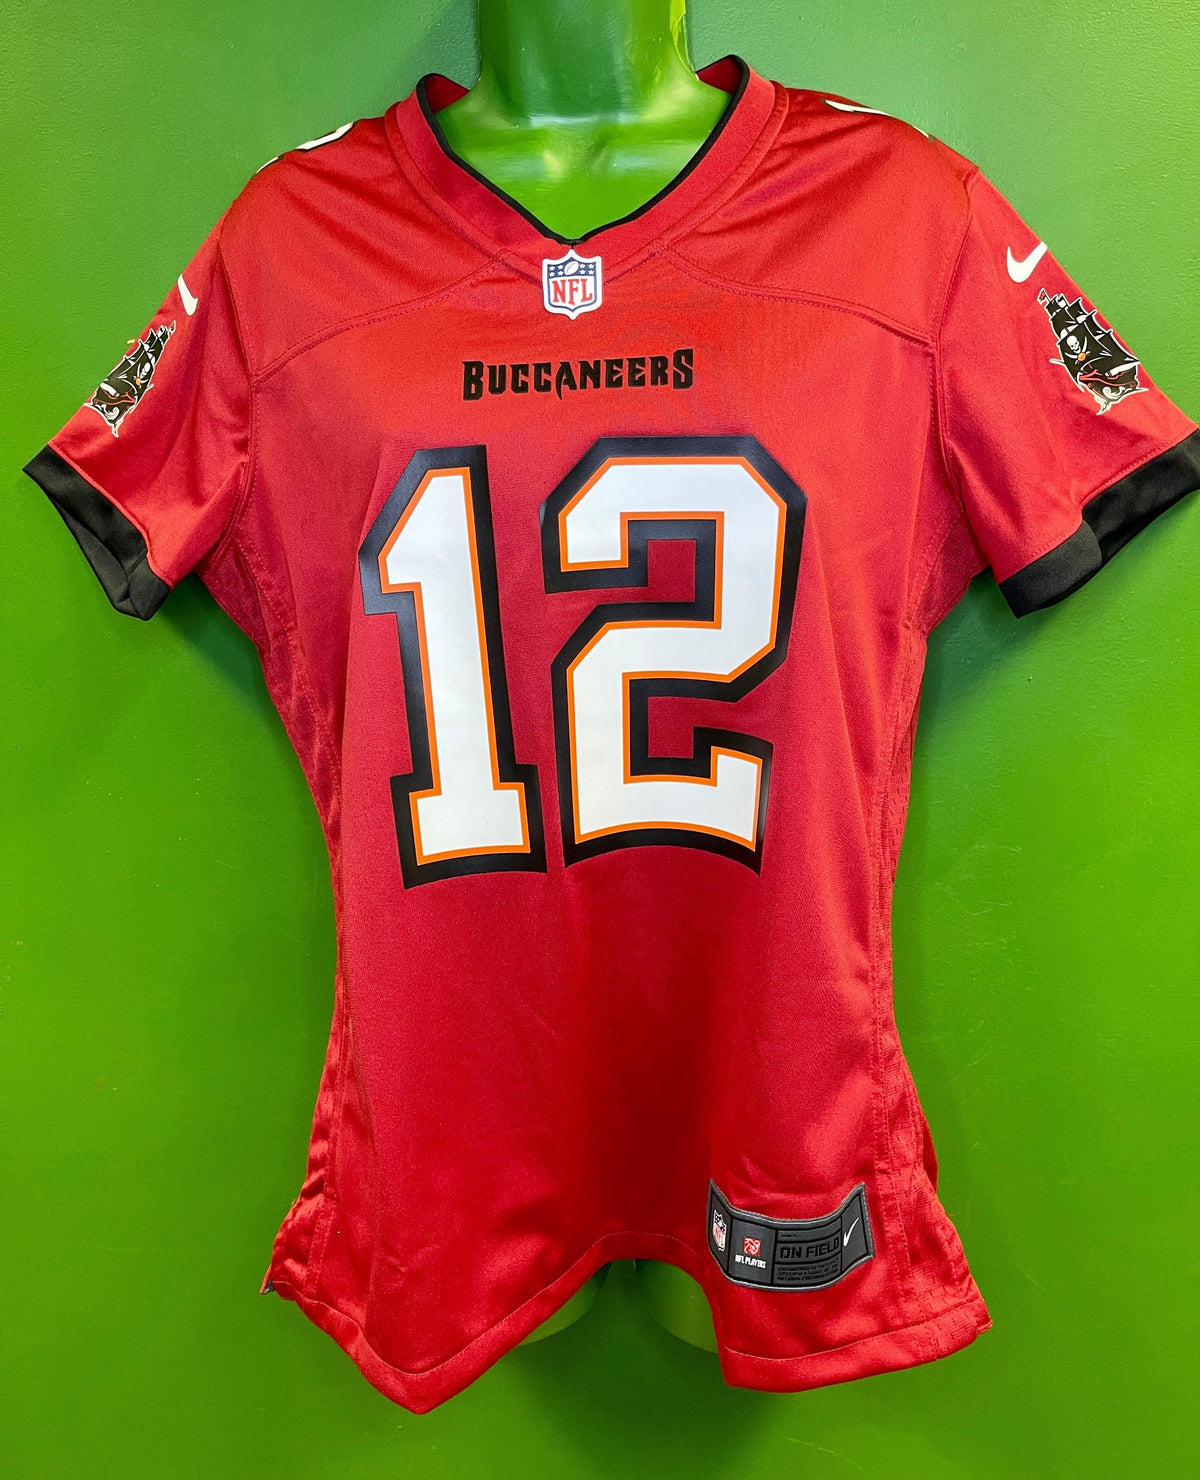 NFL Tampa Bay Buccaneers Tom Brady #12 Game Jersey Women's Large NWT